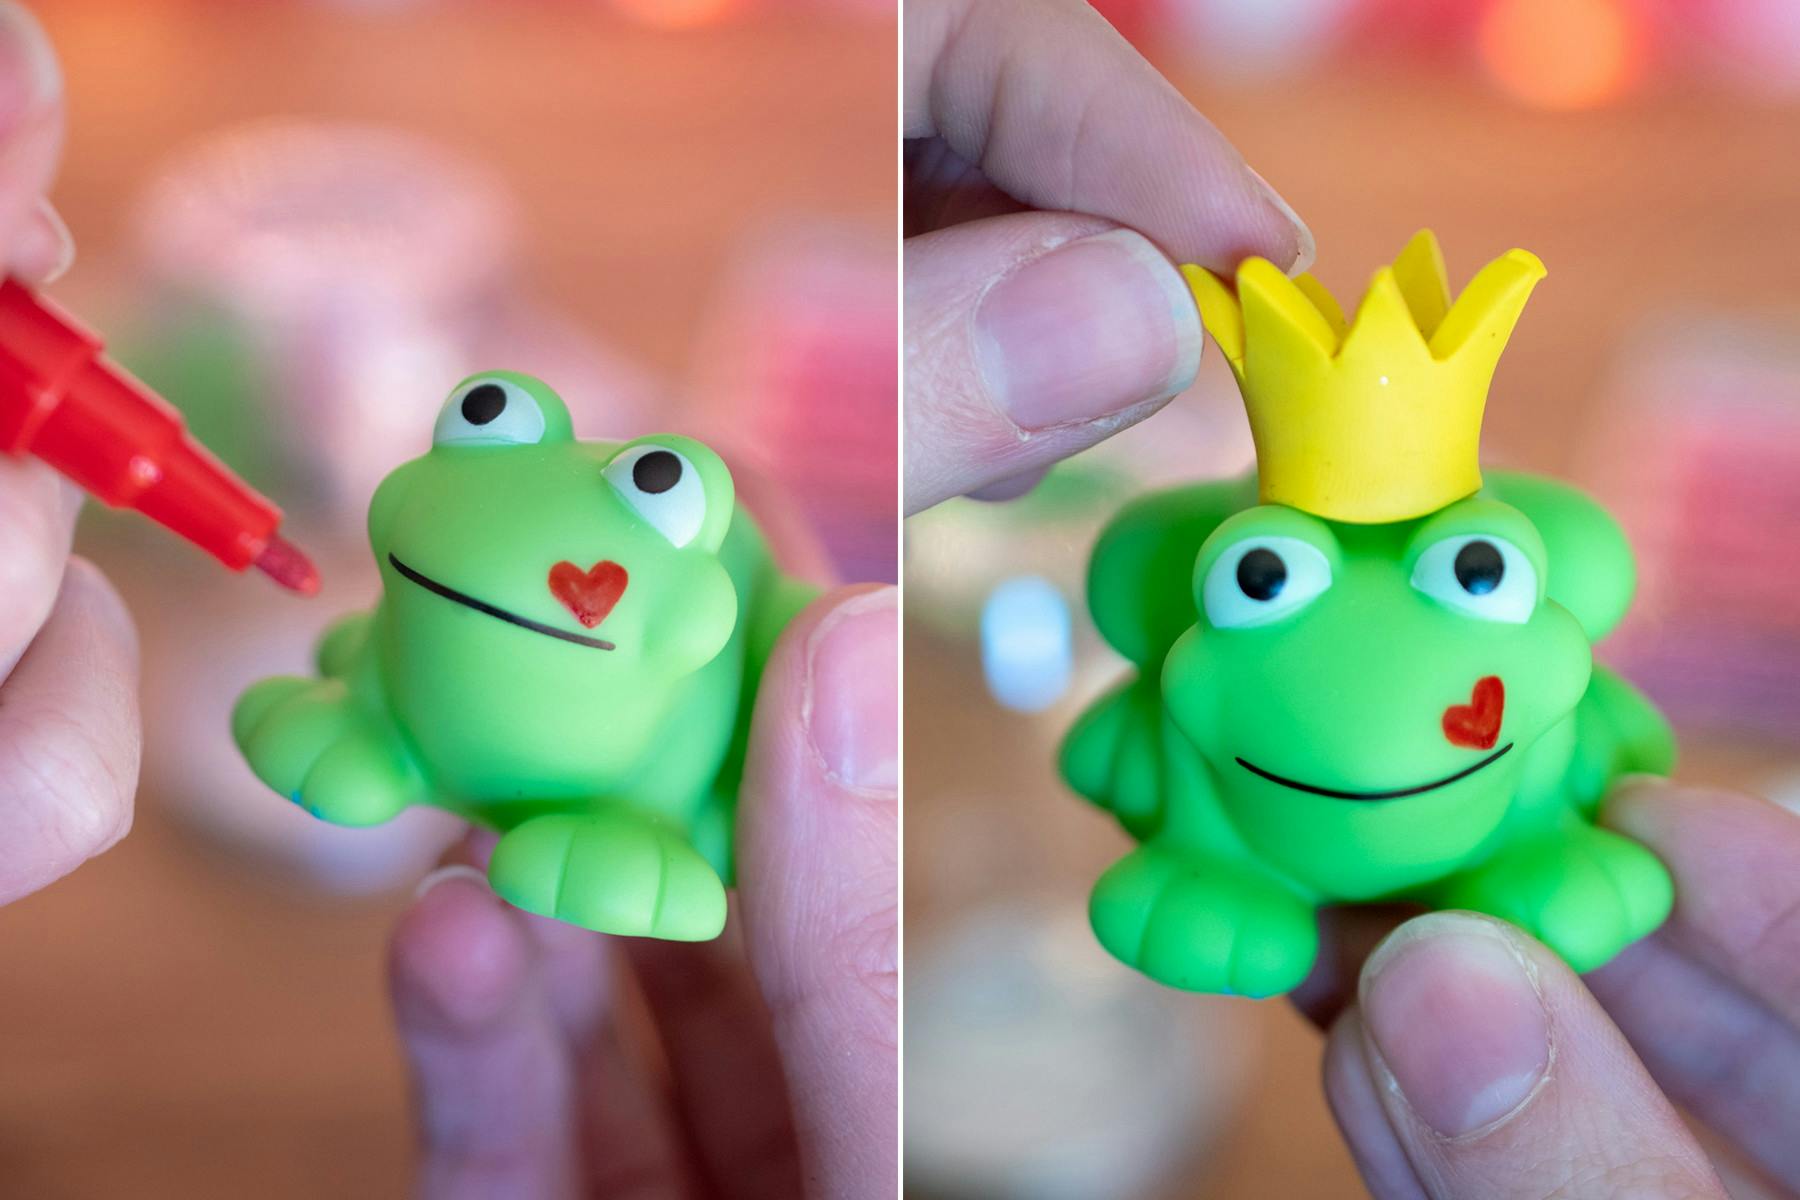 someone drawing a heart on toy frogs face and putting crown on it